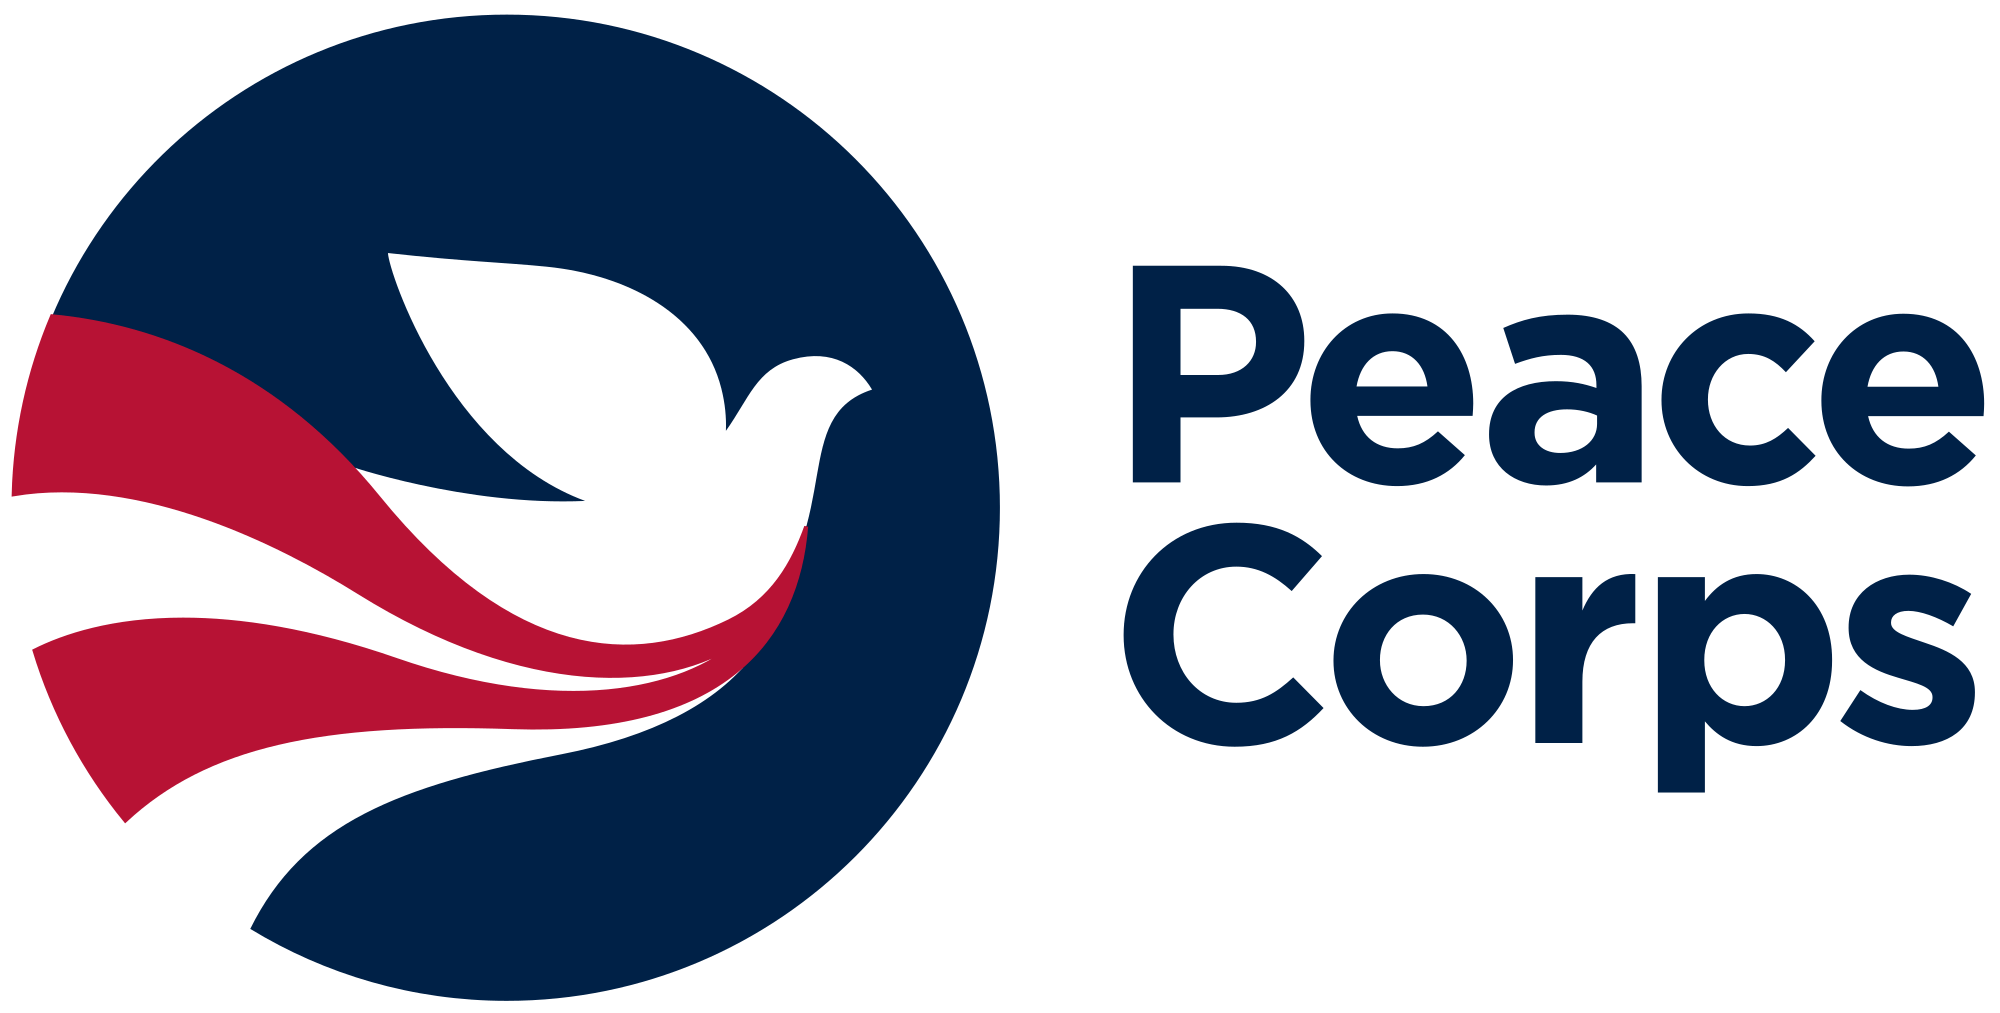 The Corps Logo - Peace corps logo16.svg